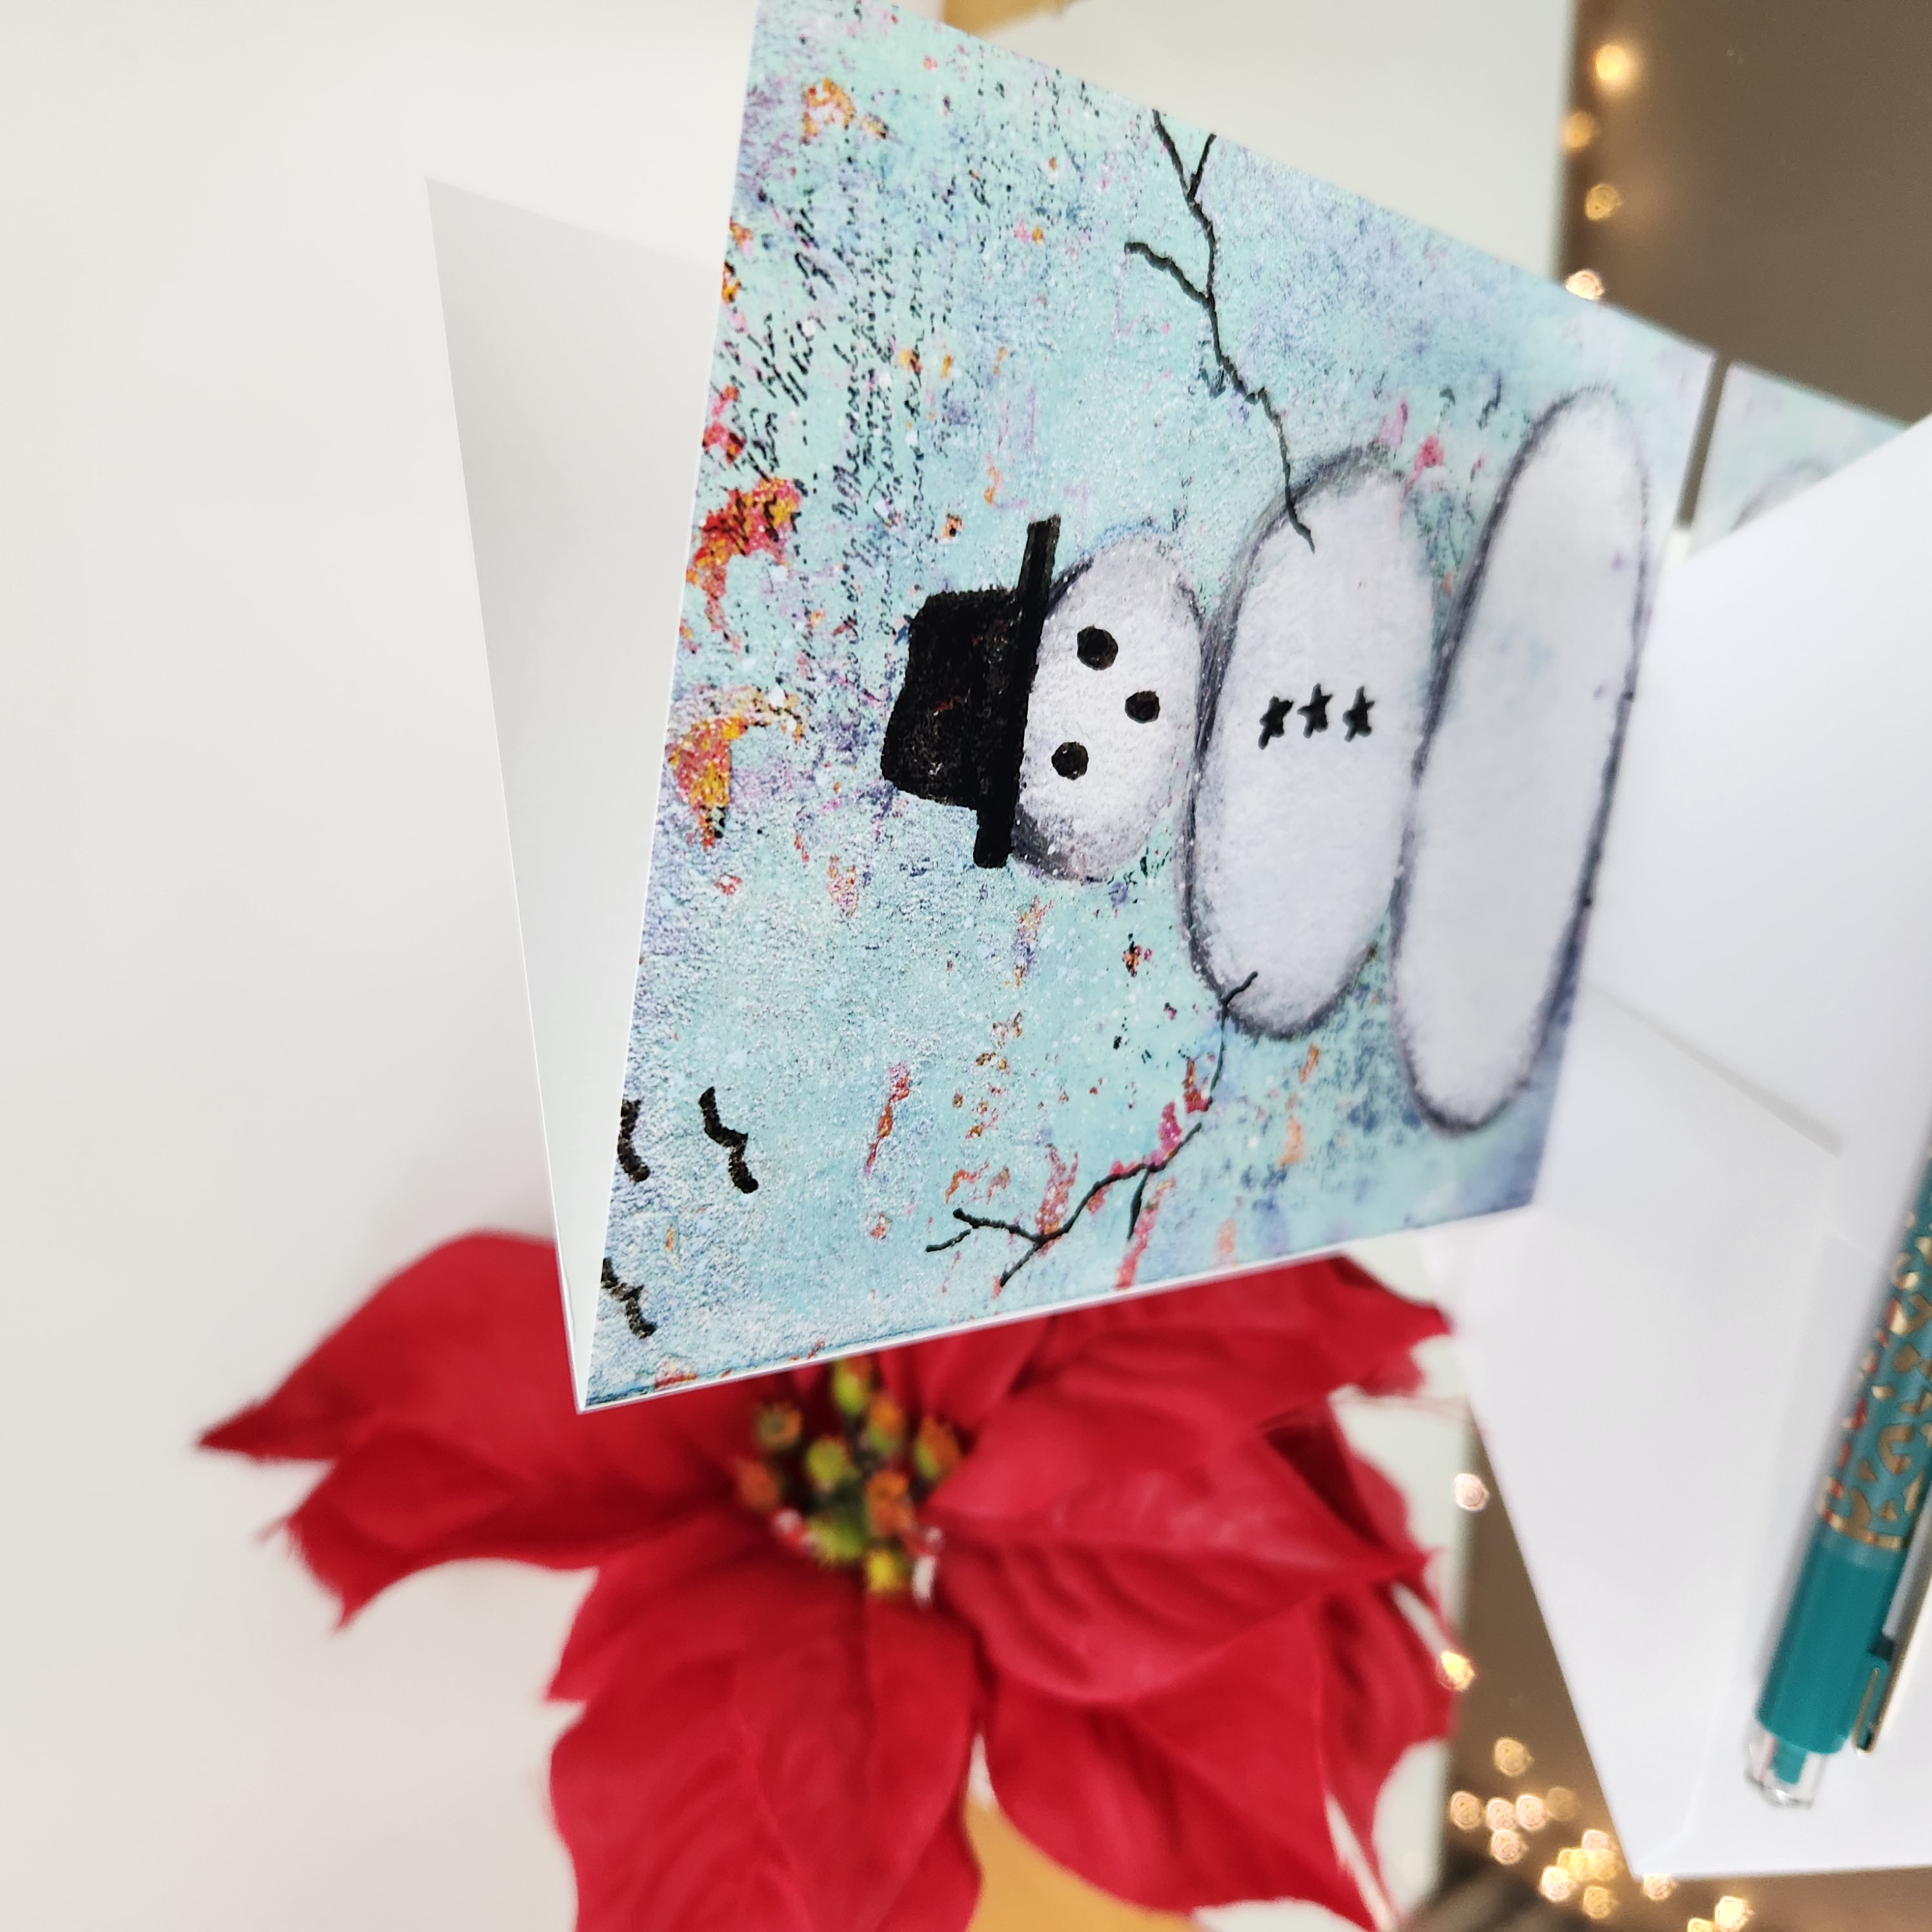 Mr. Bill- A2 greeting card with snowman artwork on the front. Patty Donahue artist